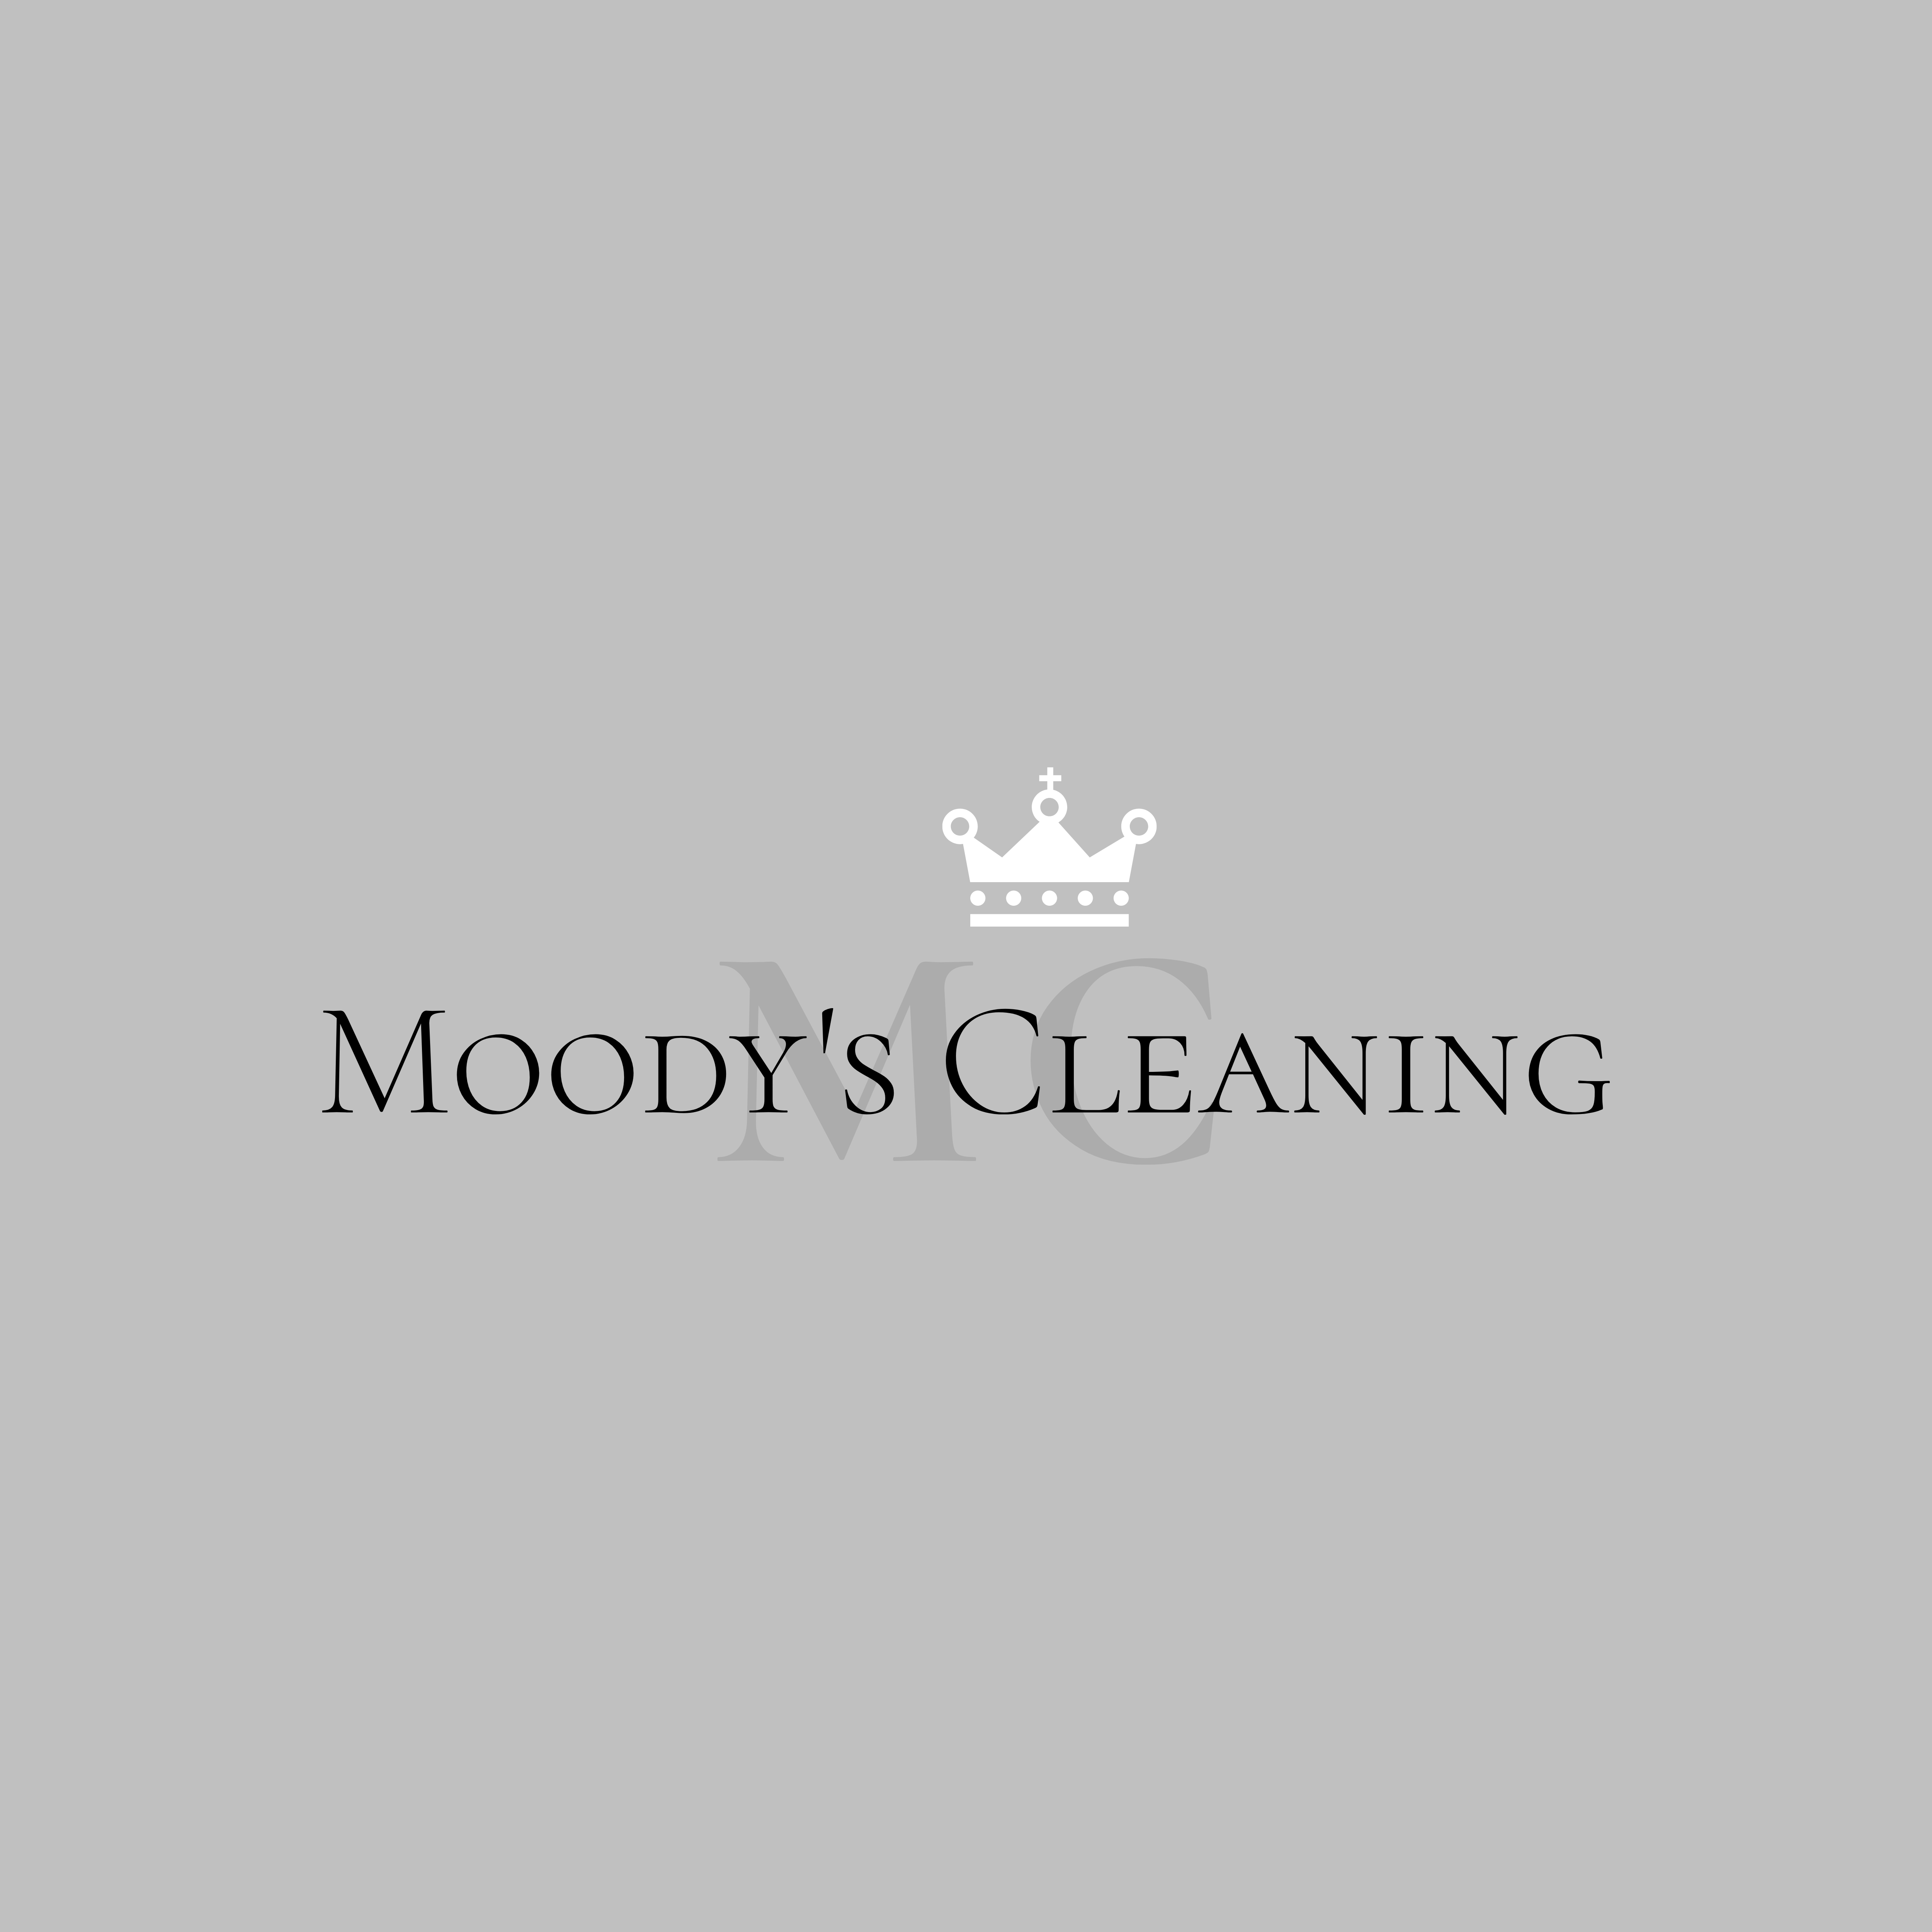 Moody's Cleaning Logo